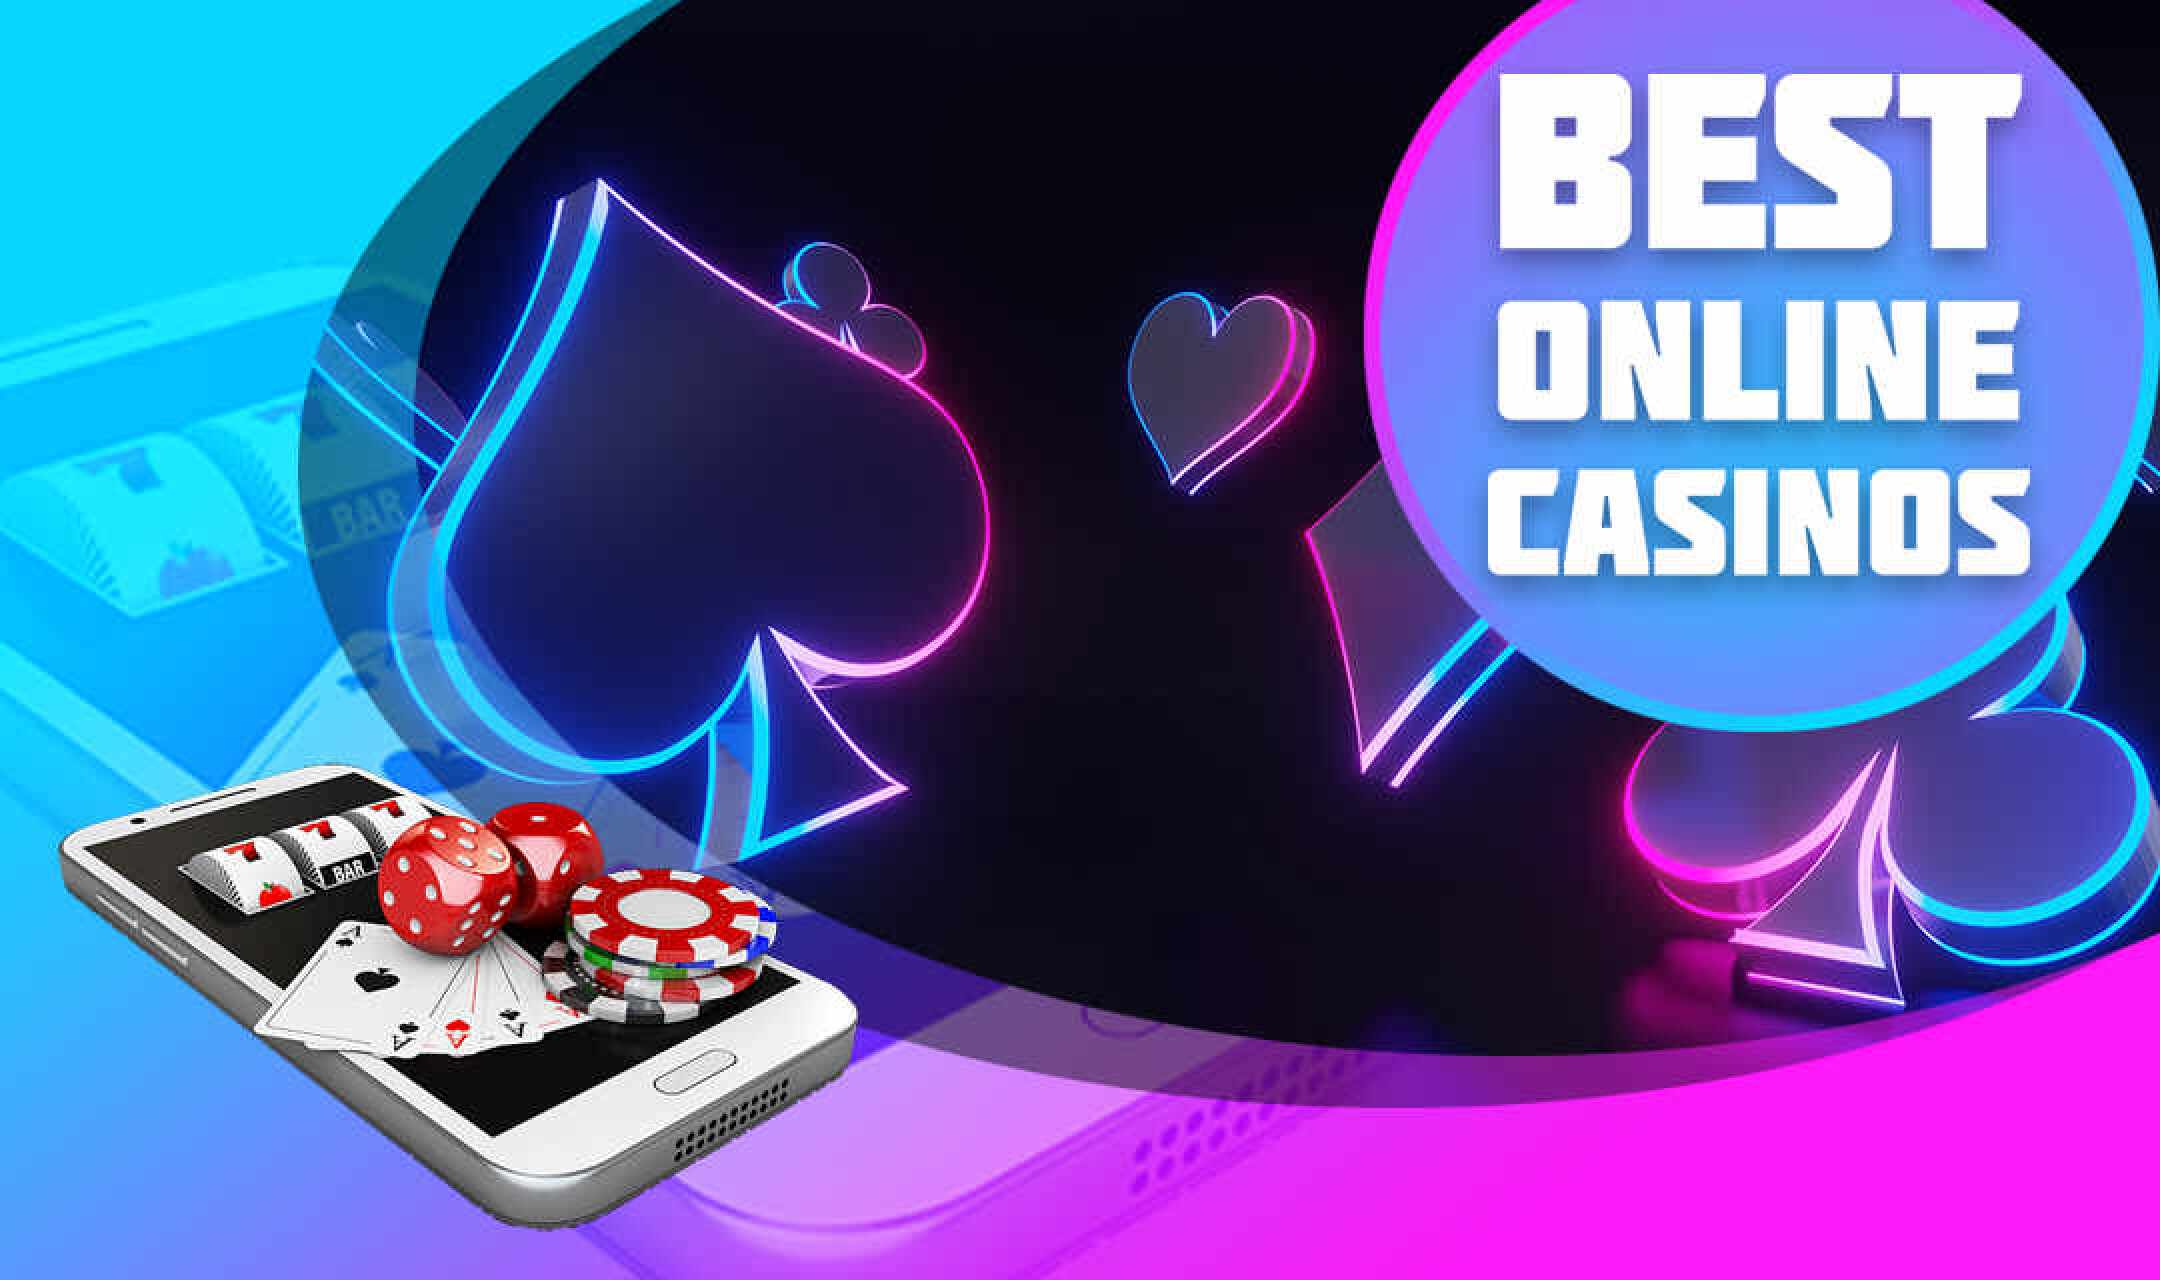 Best Online Casinos Ranked for Casino Site Reputation, Game Variety, and Bonuses